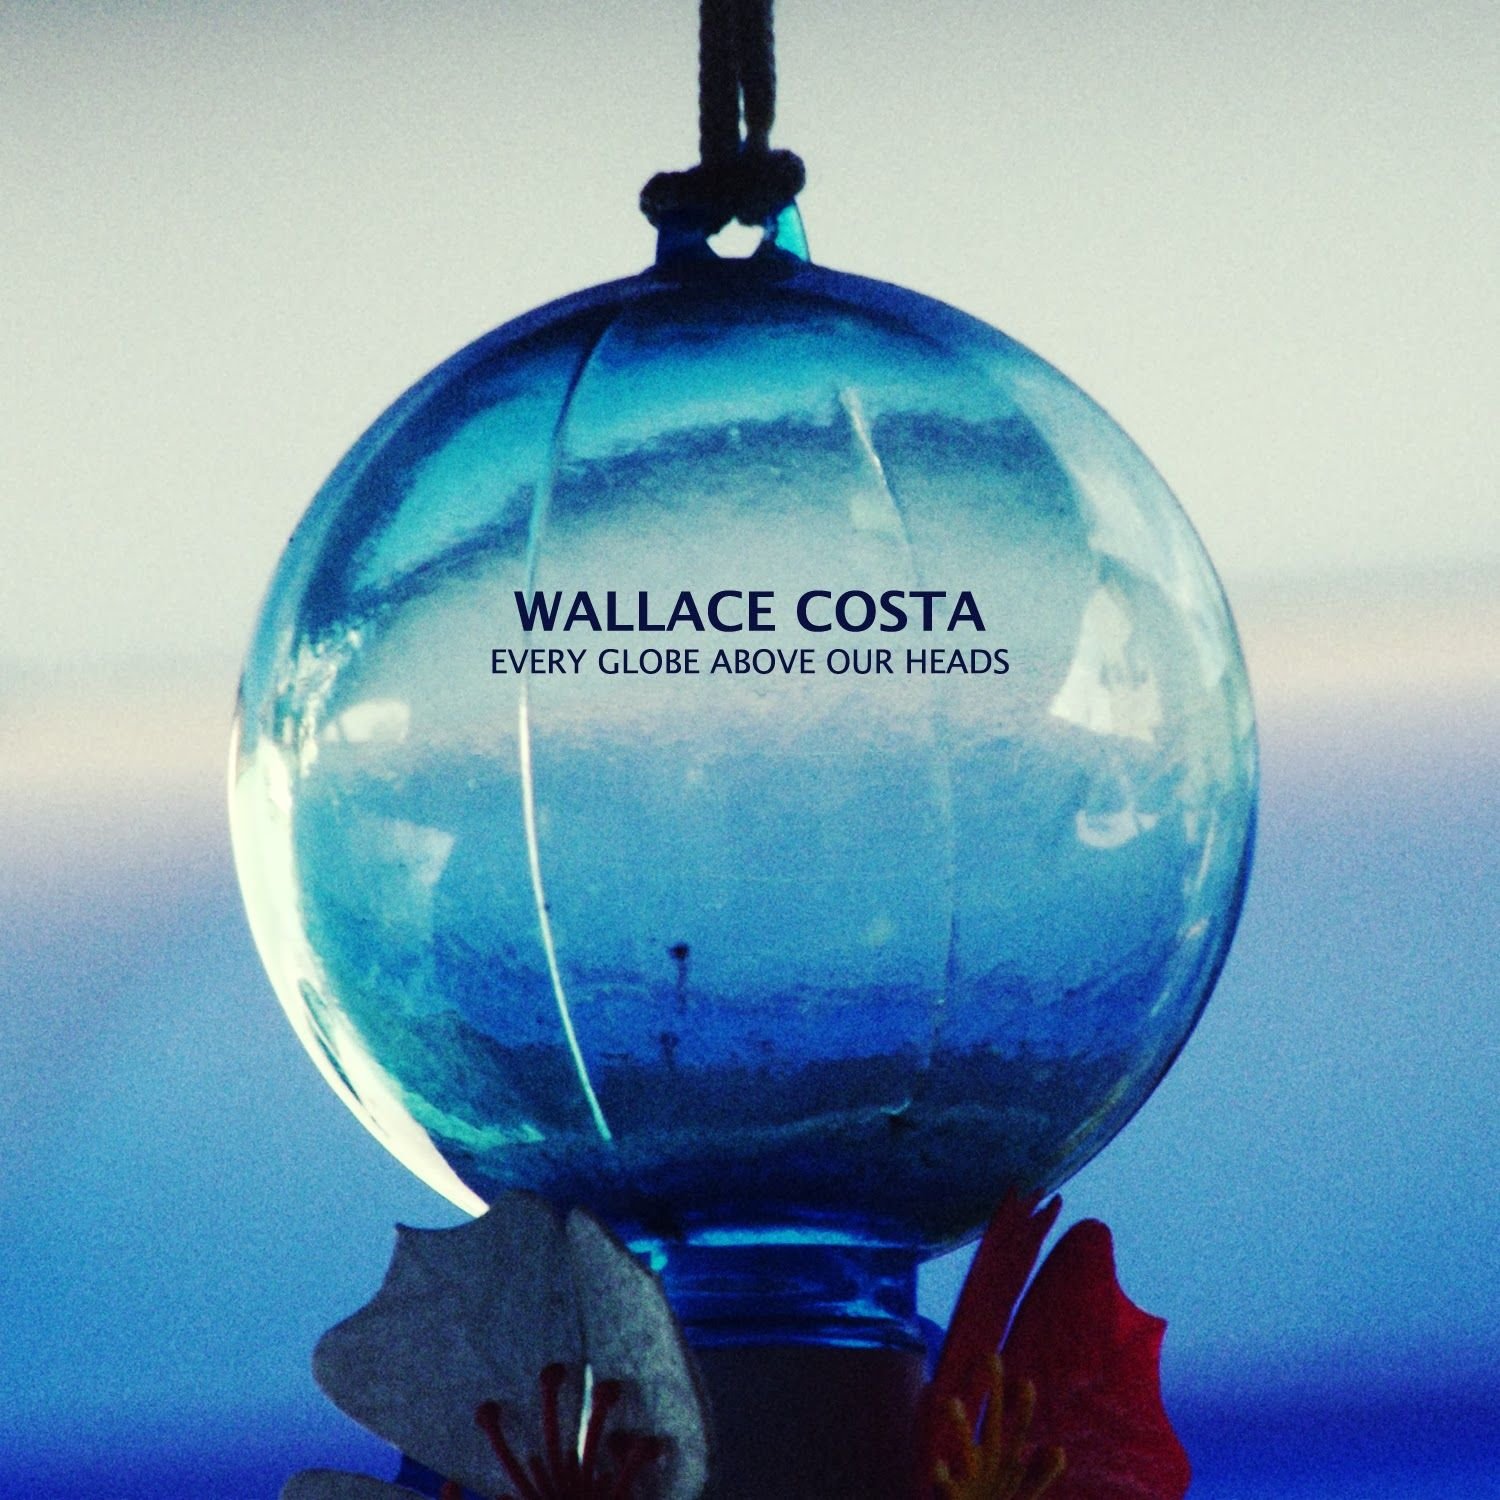 Wallace Costa – Every Globe Above Our Heads